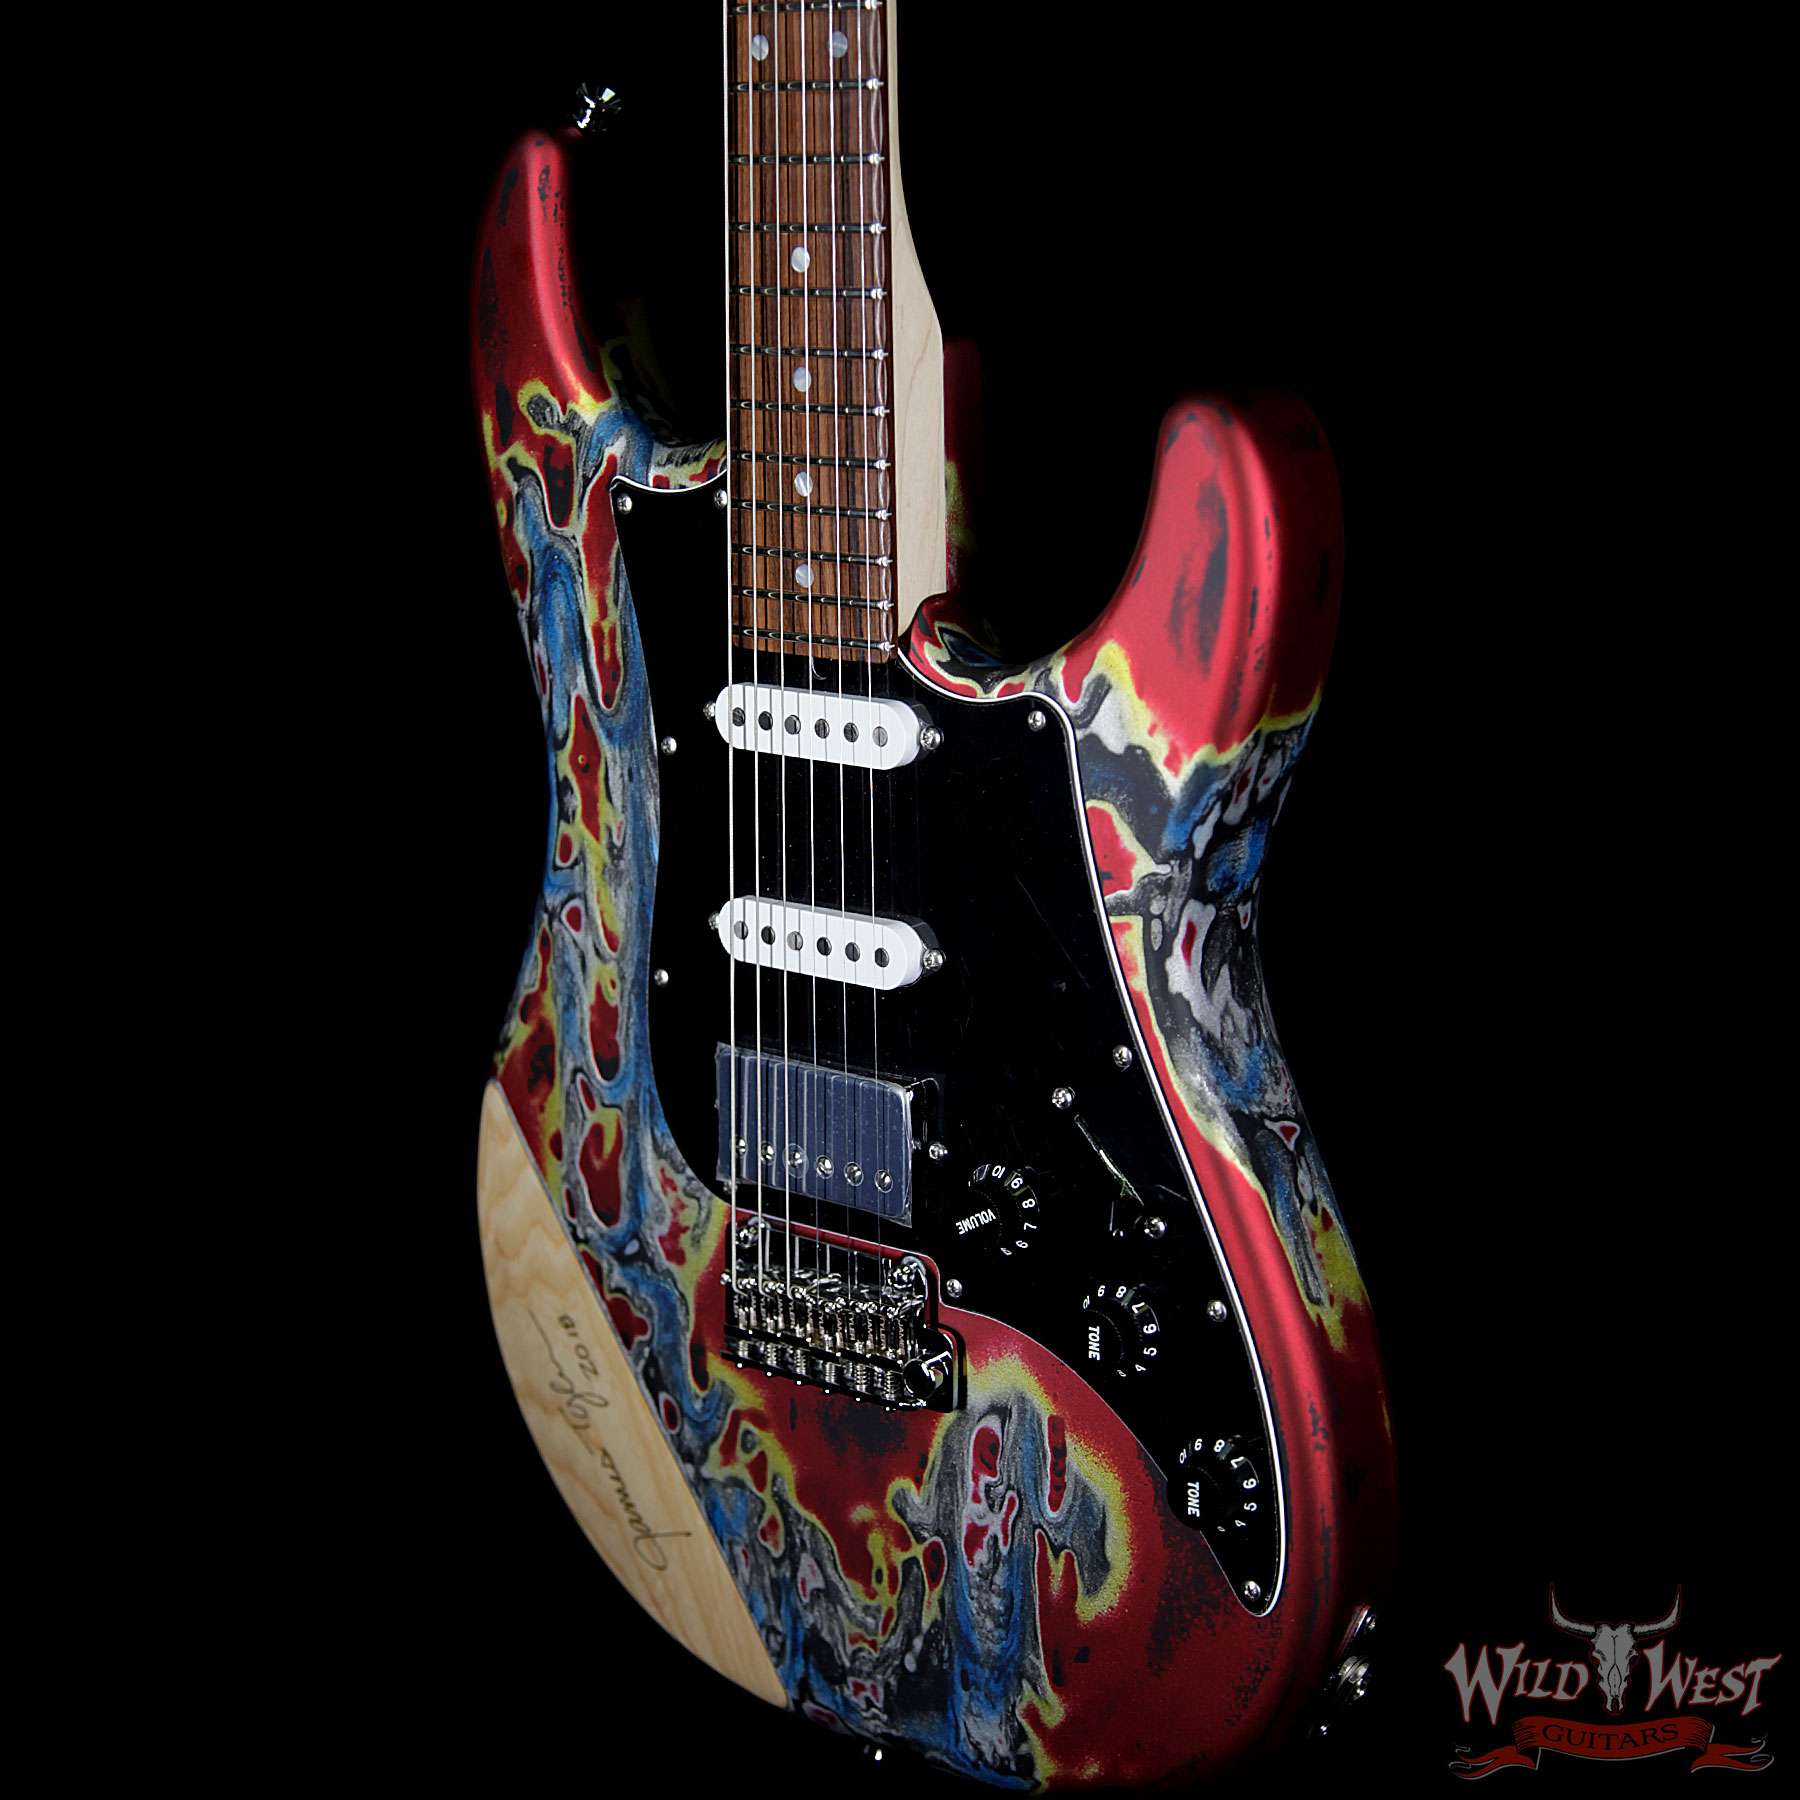 James Tyler USA Studio Elite 25th Anniversary Limited Edition Burning Water  # 58 of 75